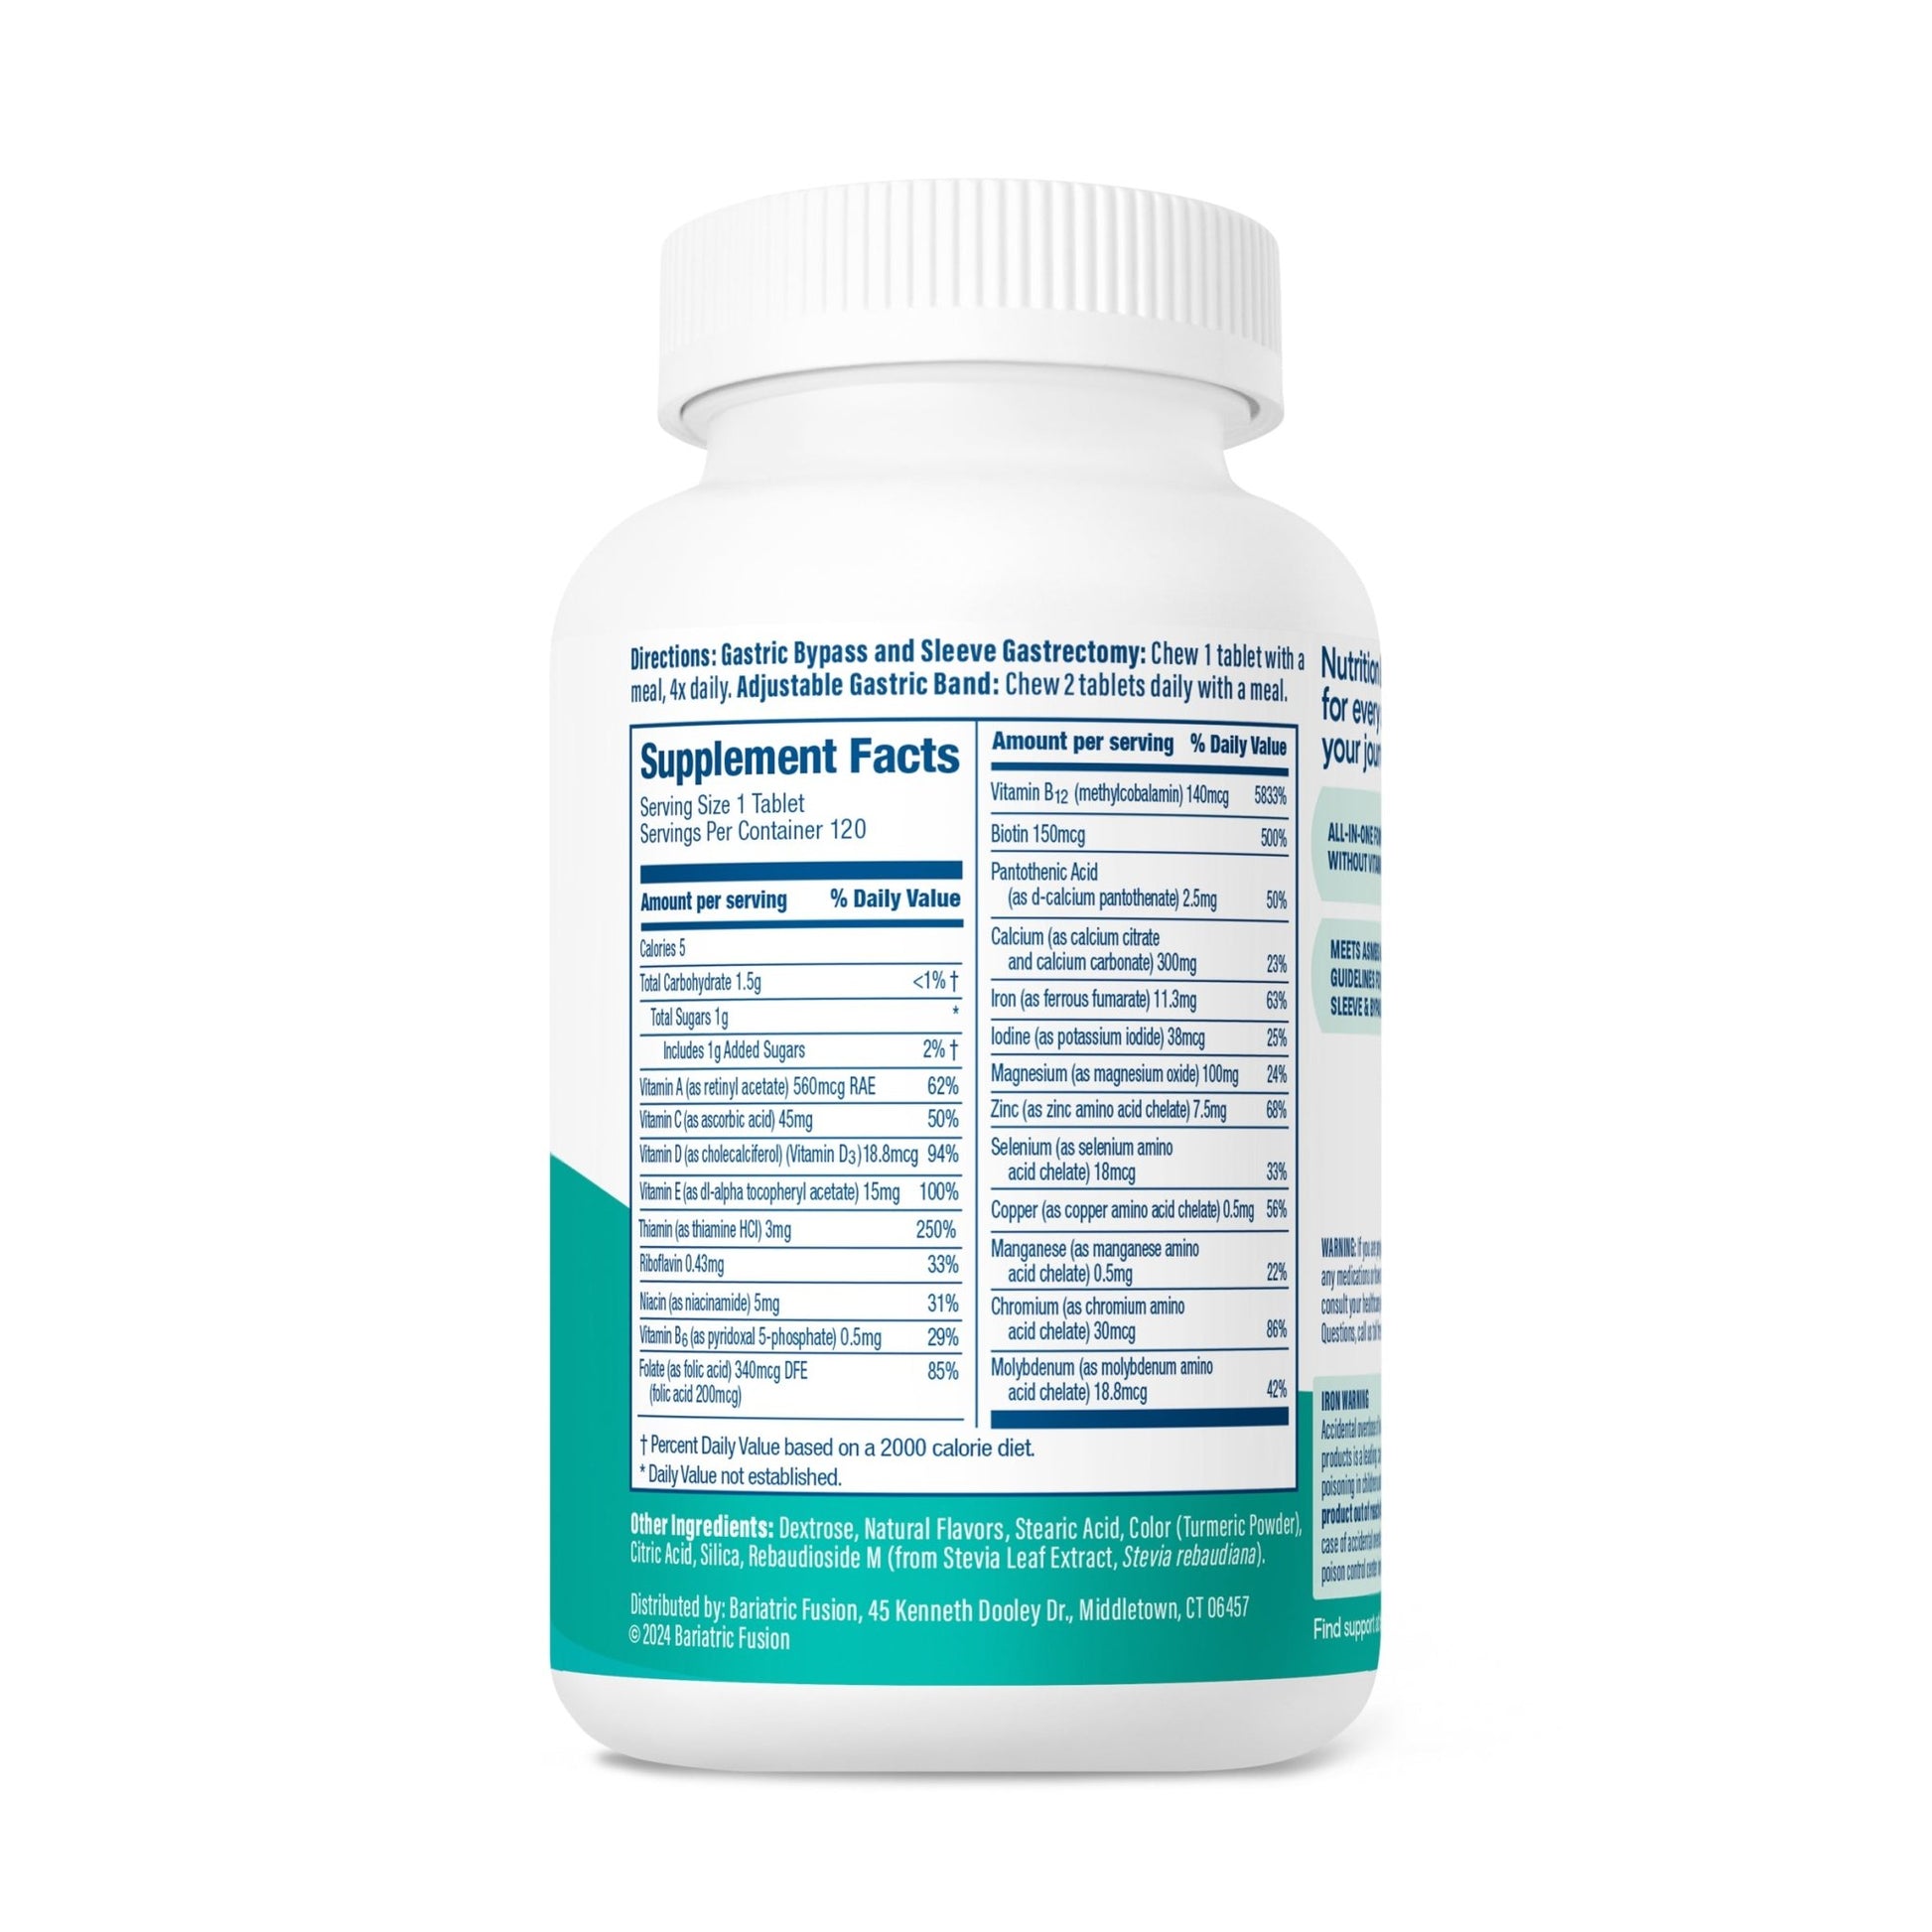 Tropical Complete Chewable Bariatric Multivitamin directions, servings and ingredients.